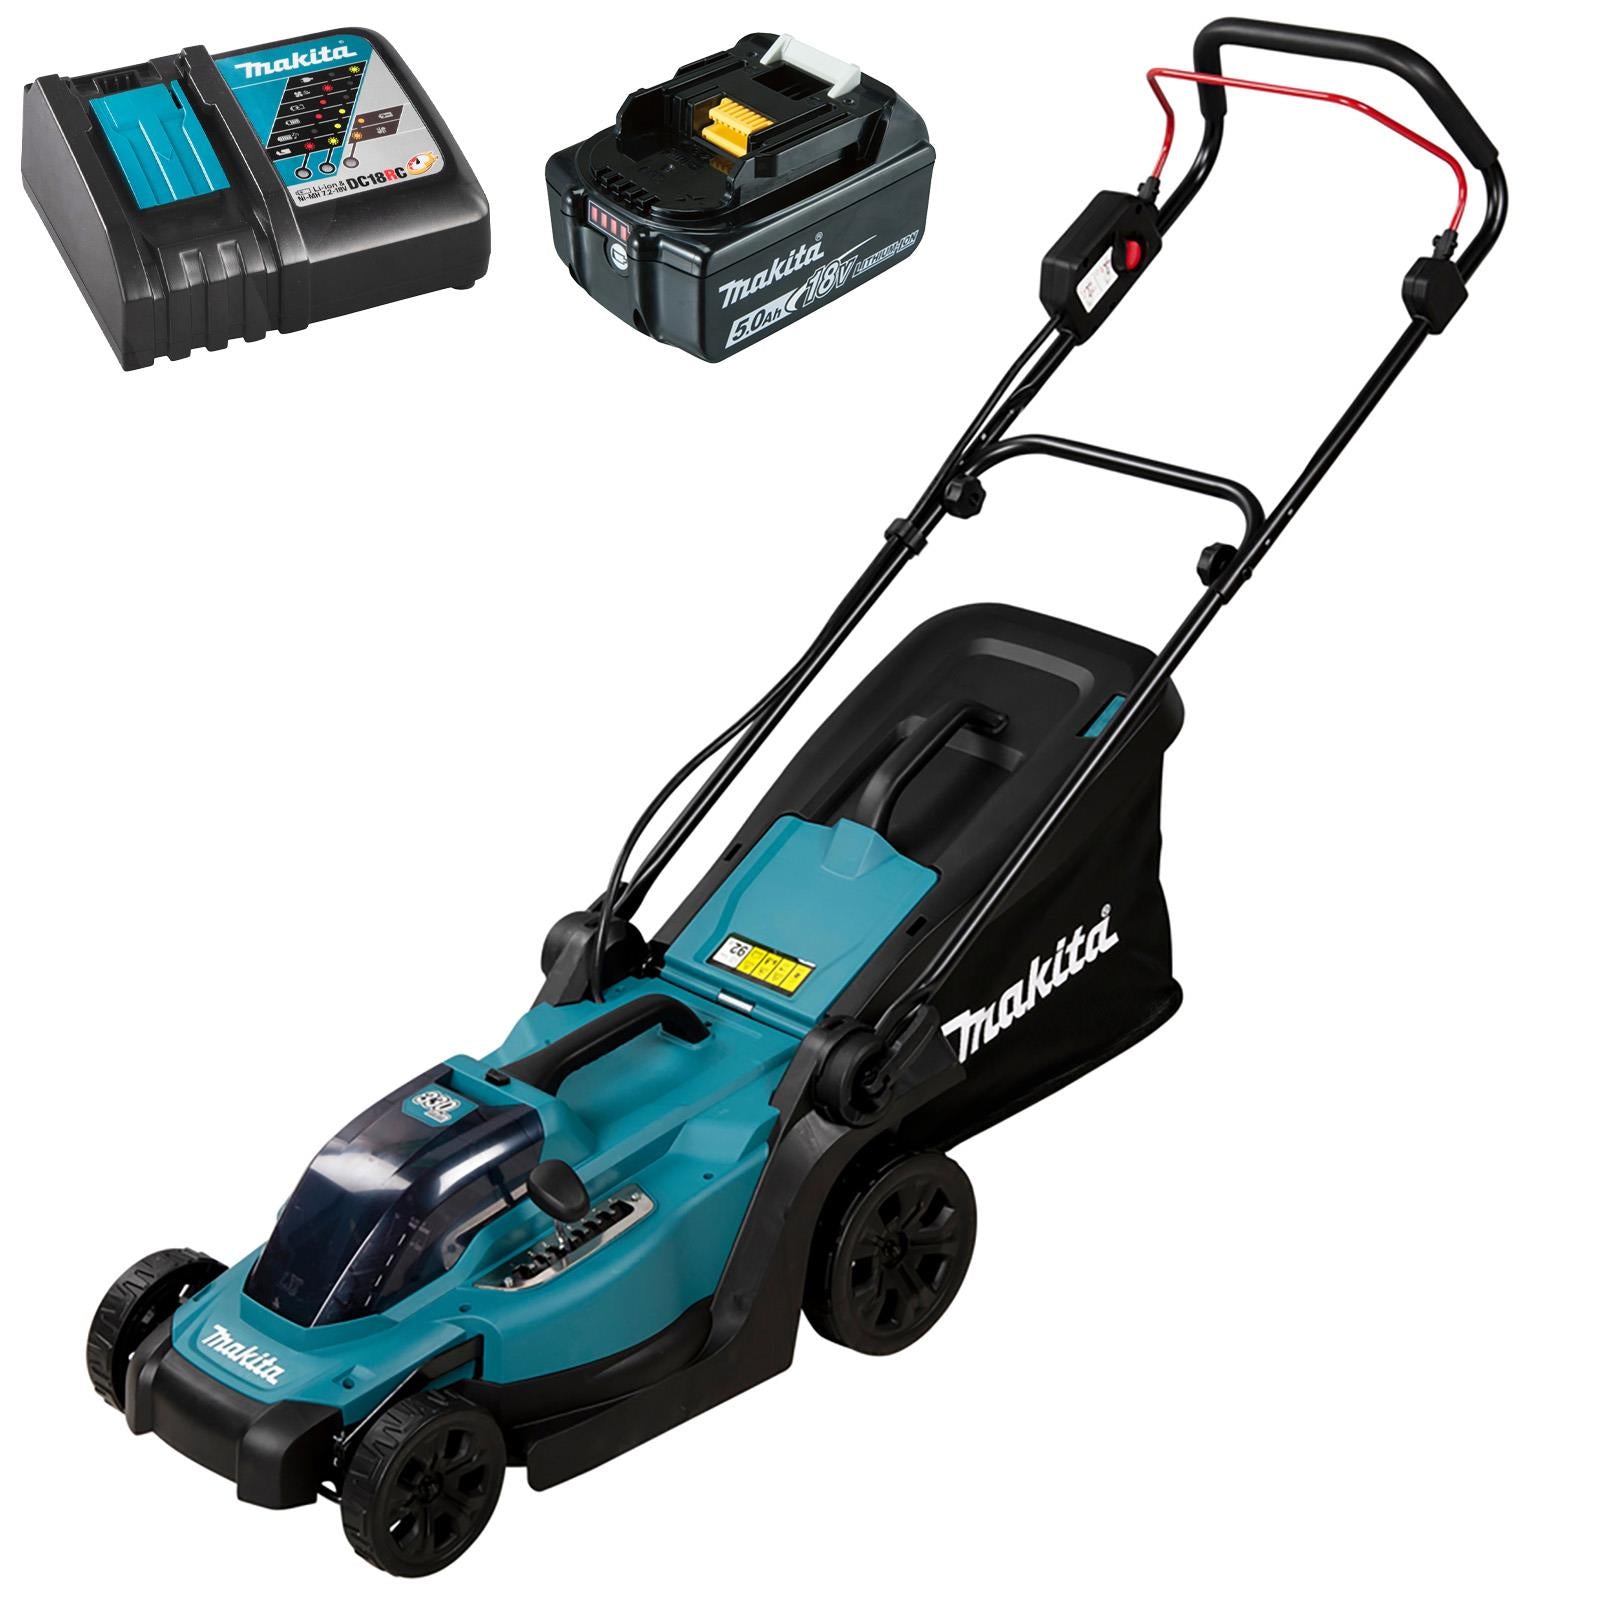 Makita 33cm Lawn Mower Kit 18V LXT Li-ion Cordless Garden Grass Outdoor 5Ah Battery and Charger DLM330RT